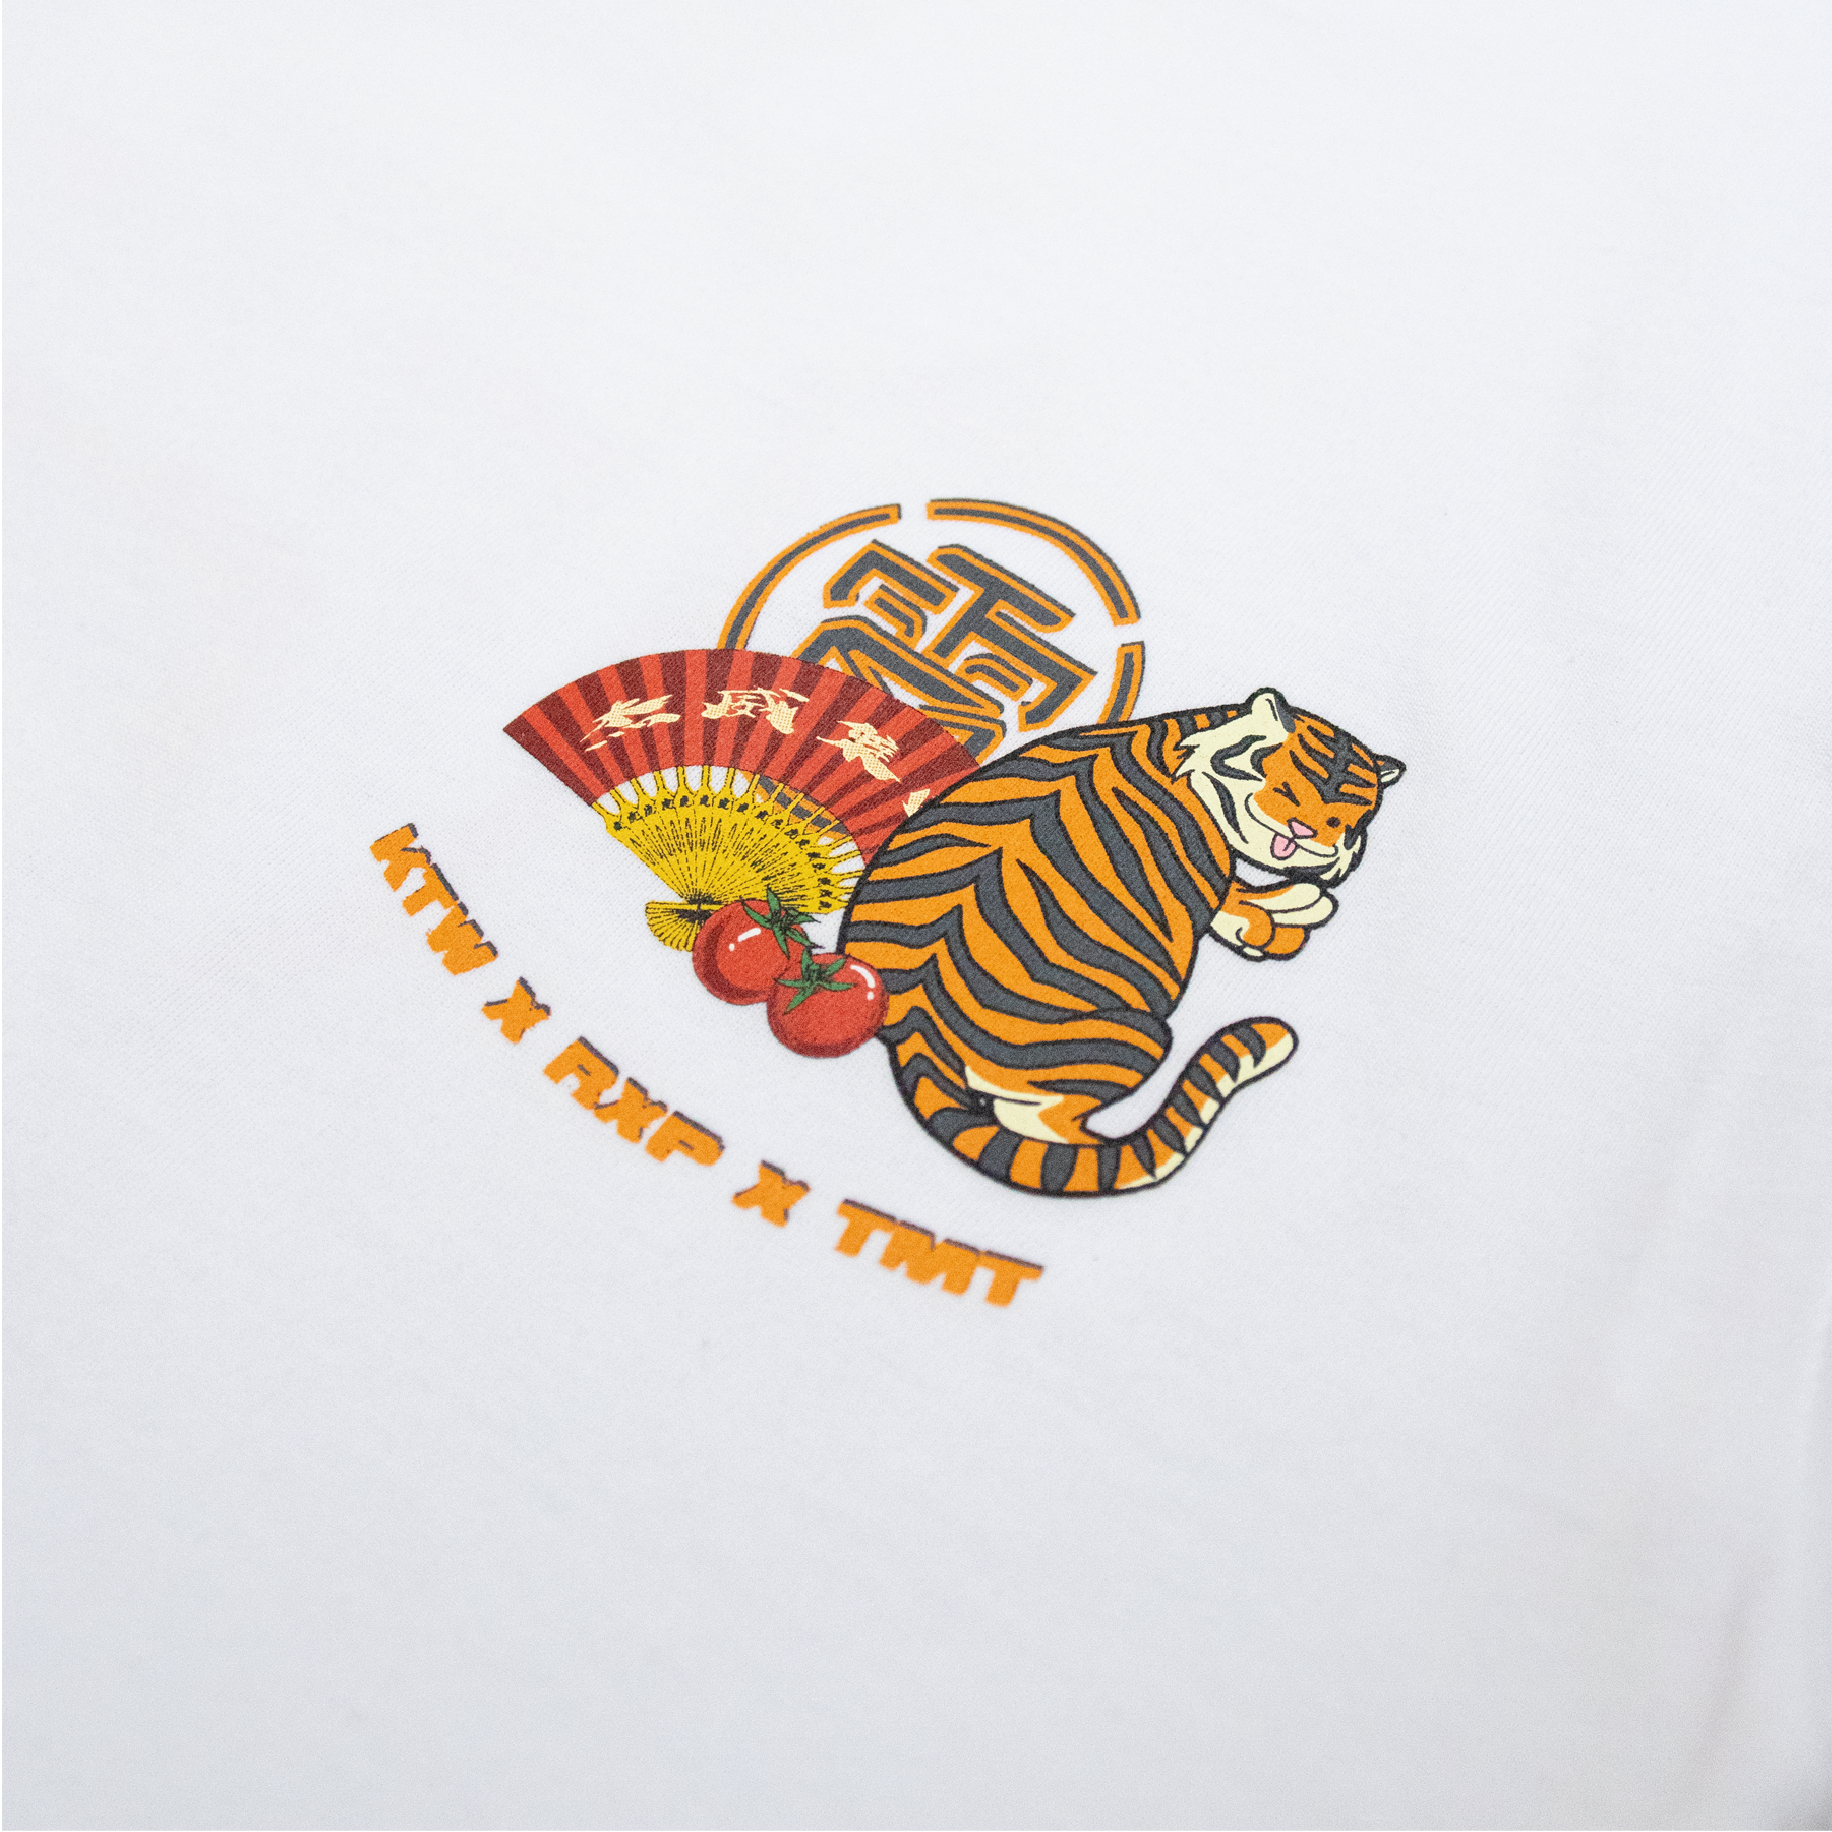 THE GREAT TIGER - OVERSIZED TEE - WHITE